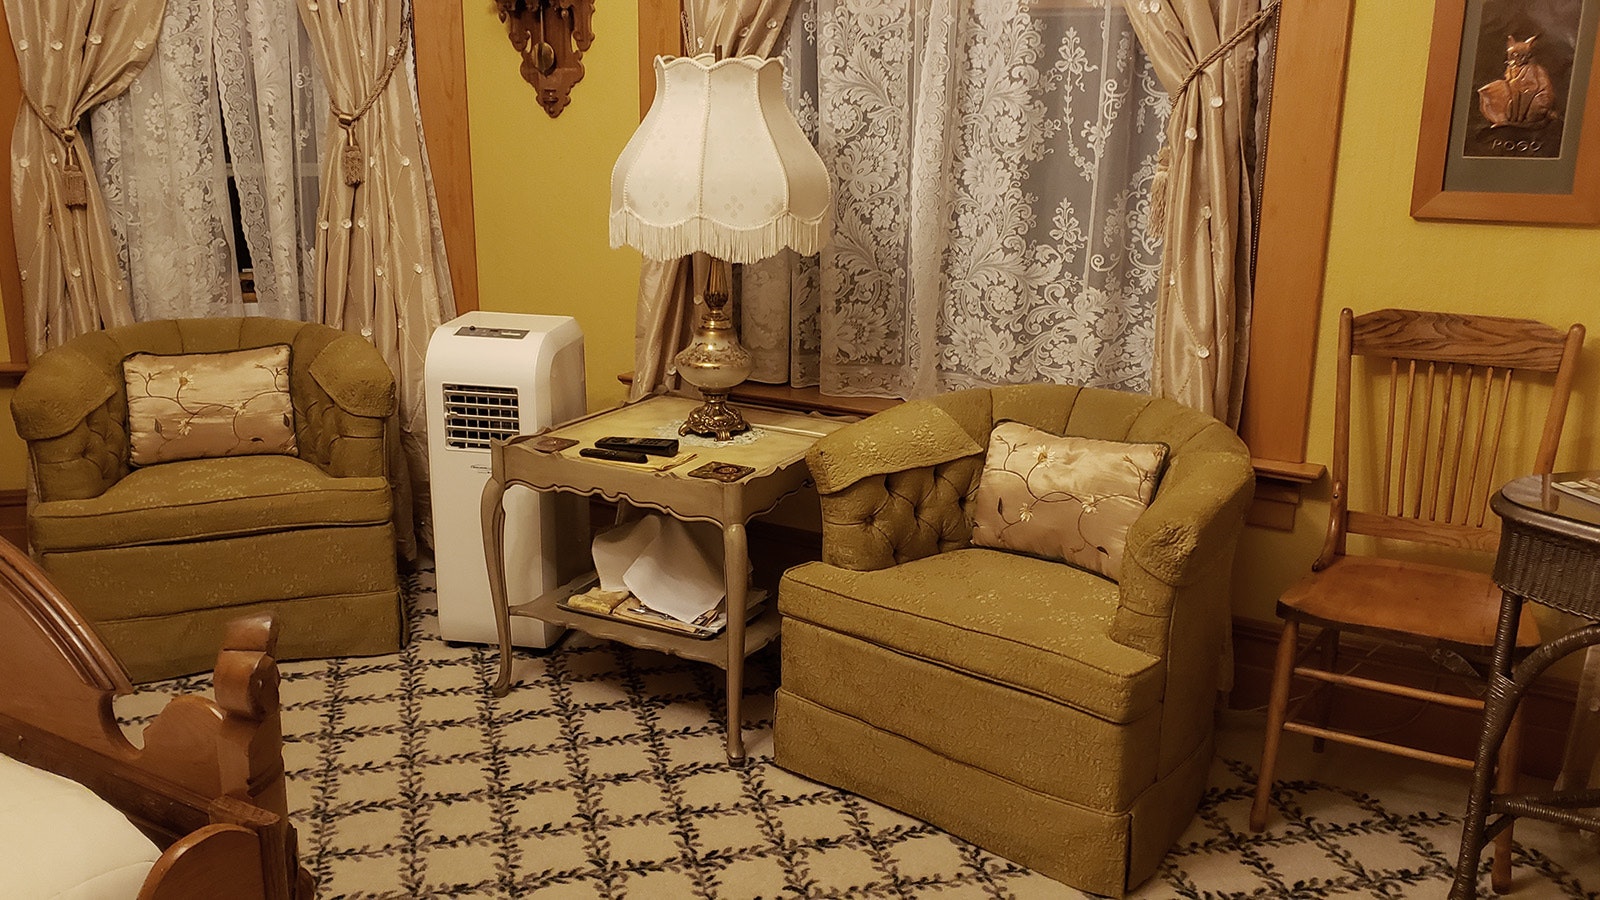 Comfortable seating is available in all three of the Airbnb stays available at the Ferris Mansion in Rawlins.